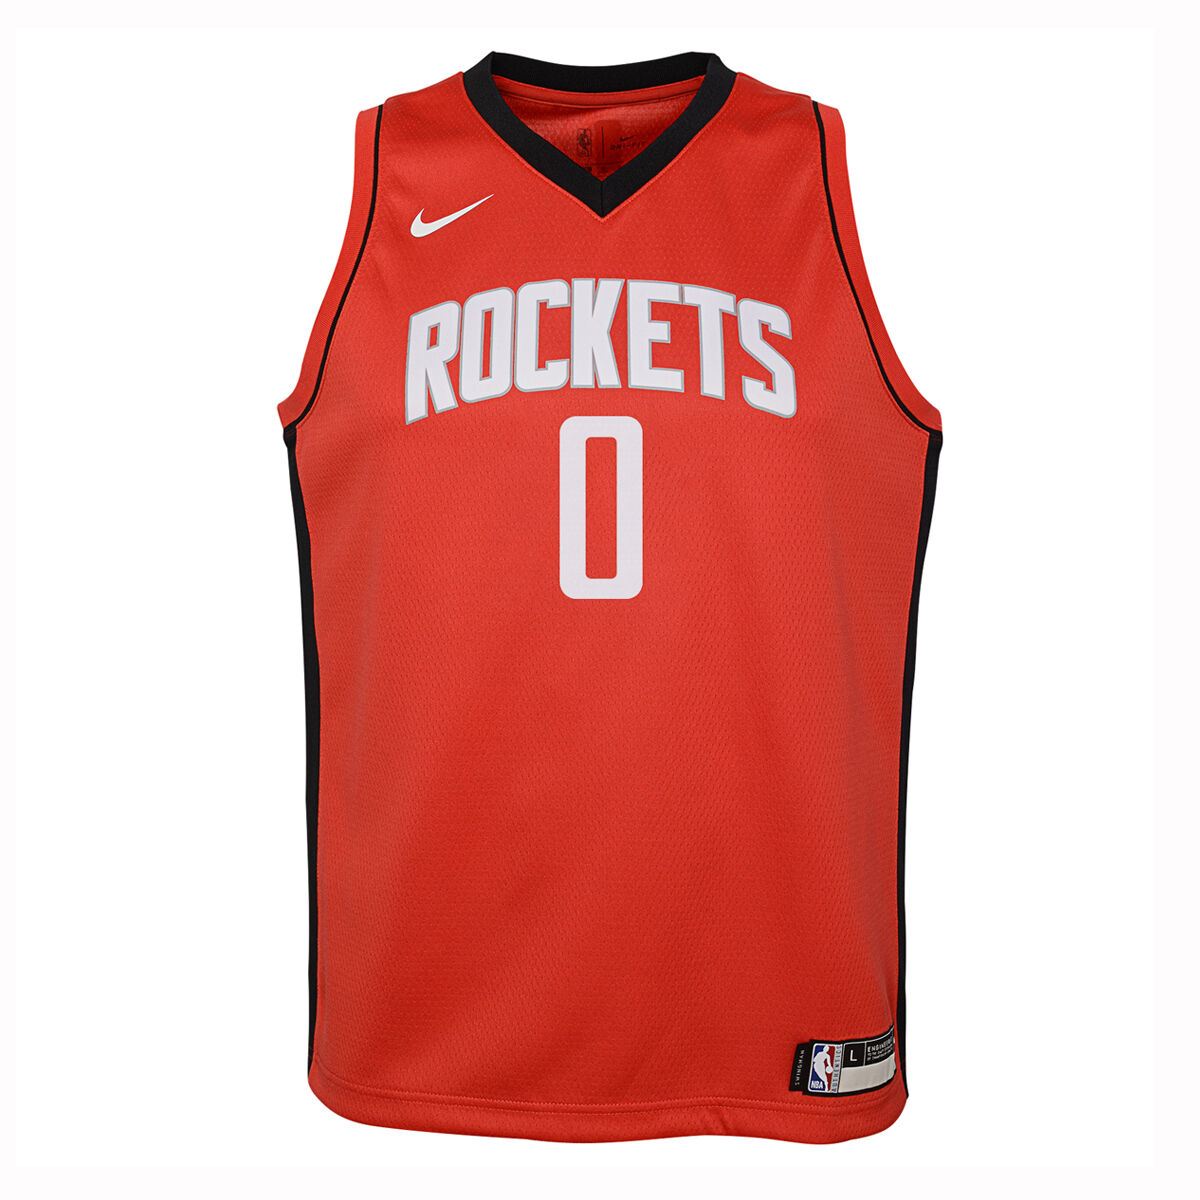 russell westbrook jersey youth xl